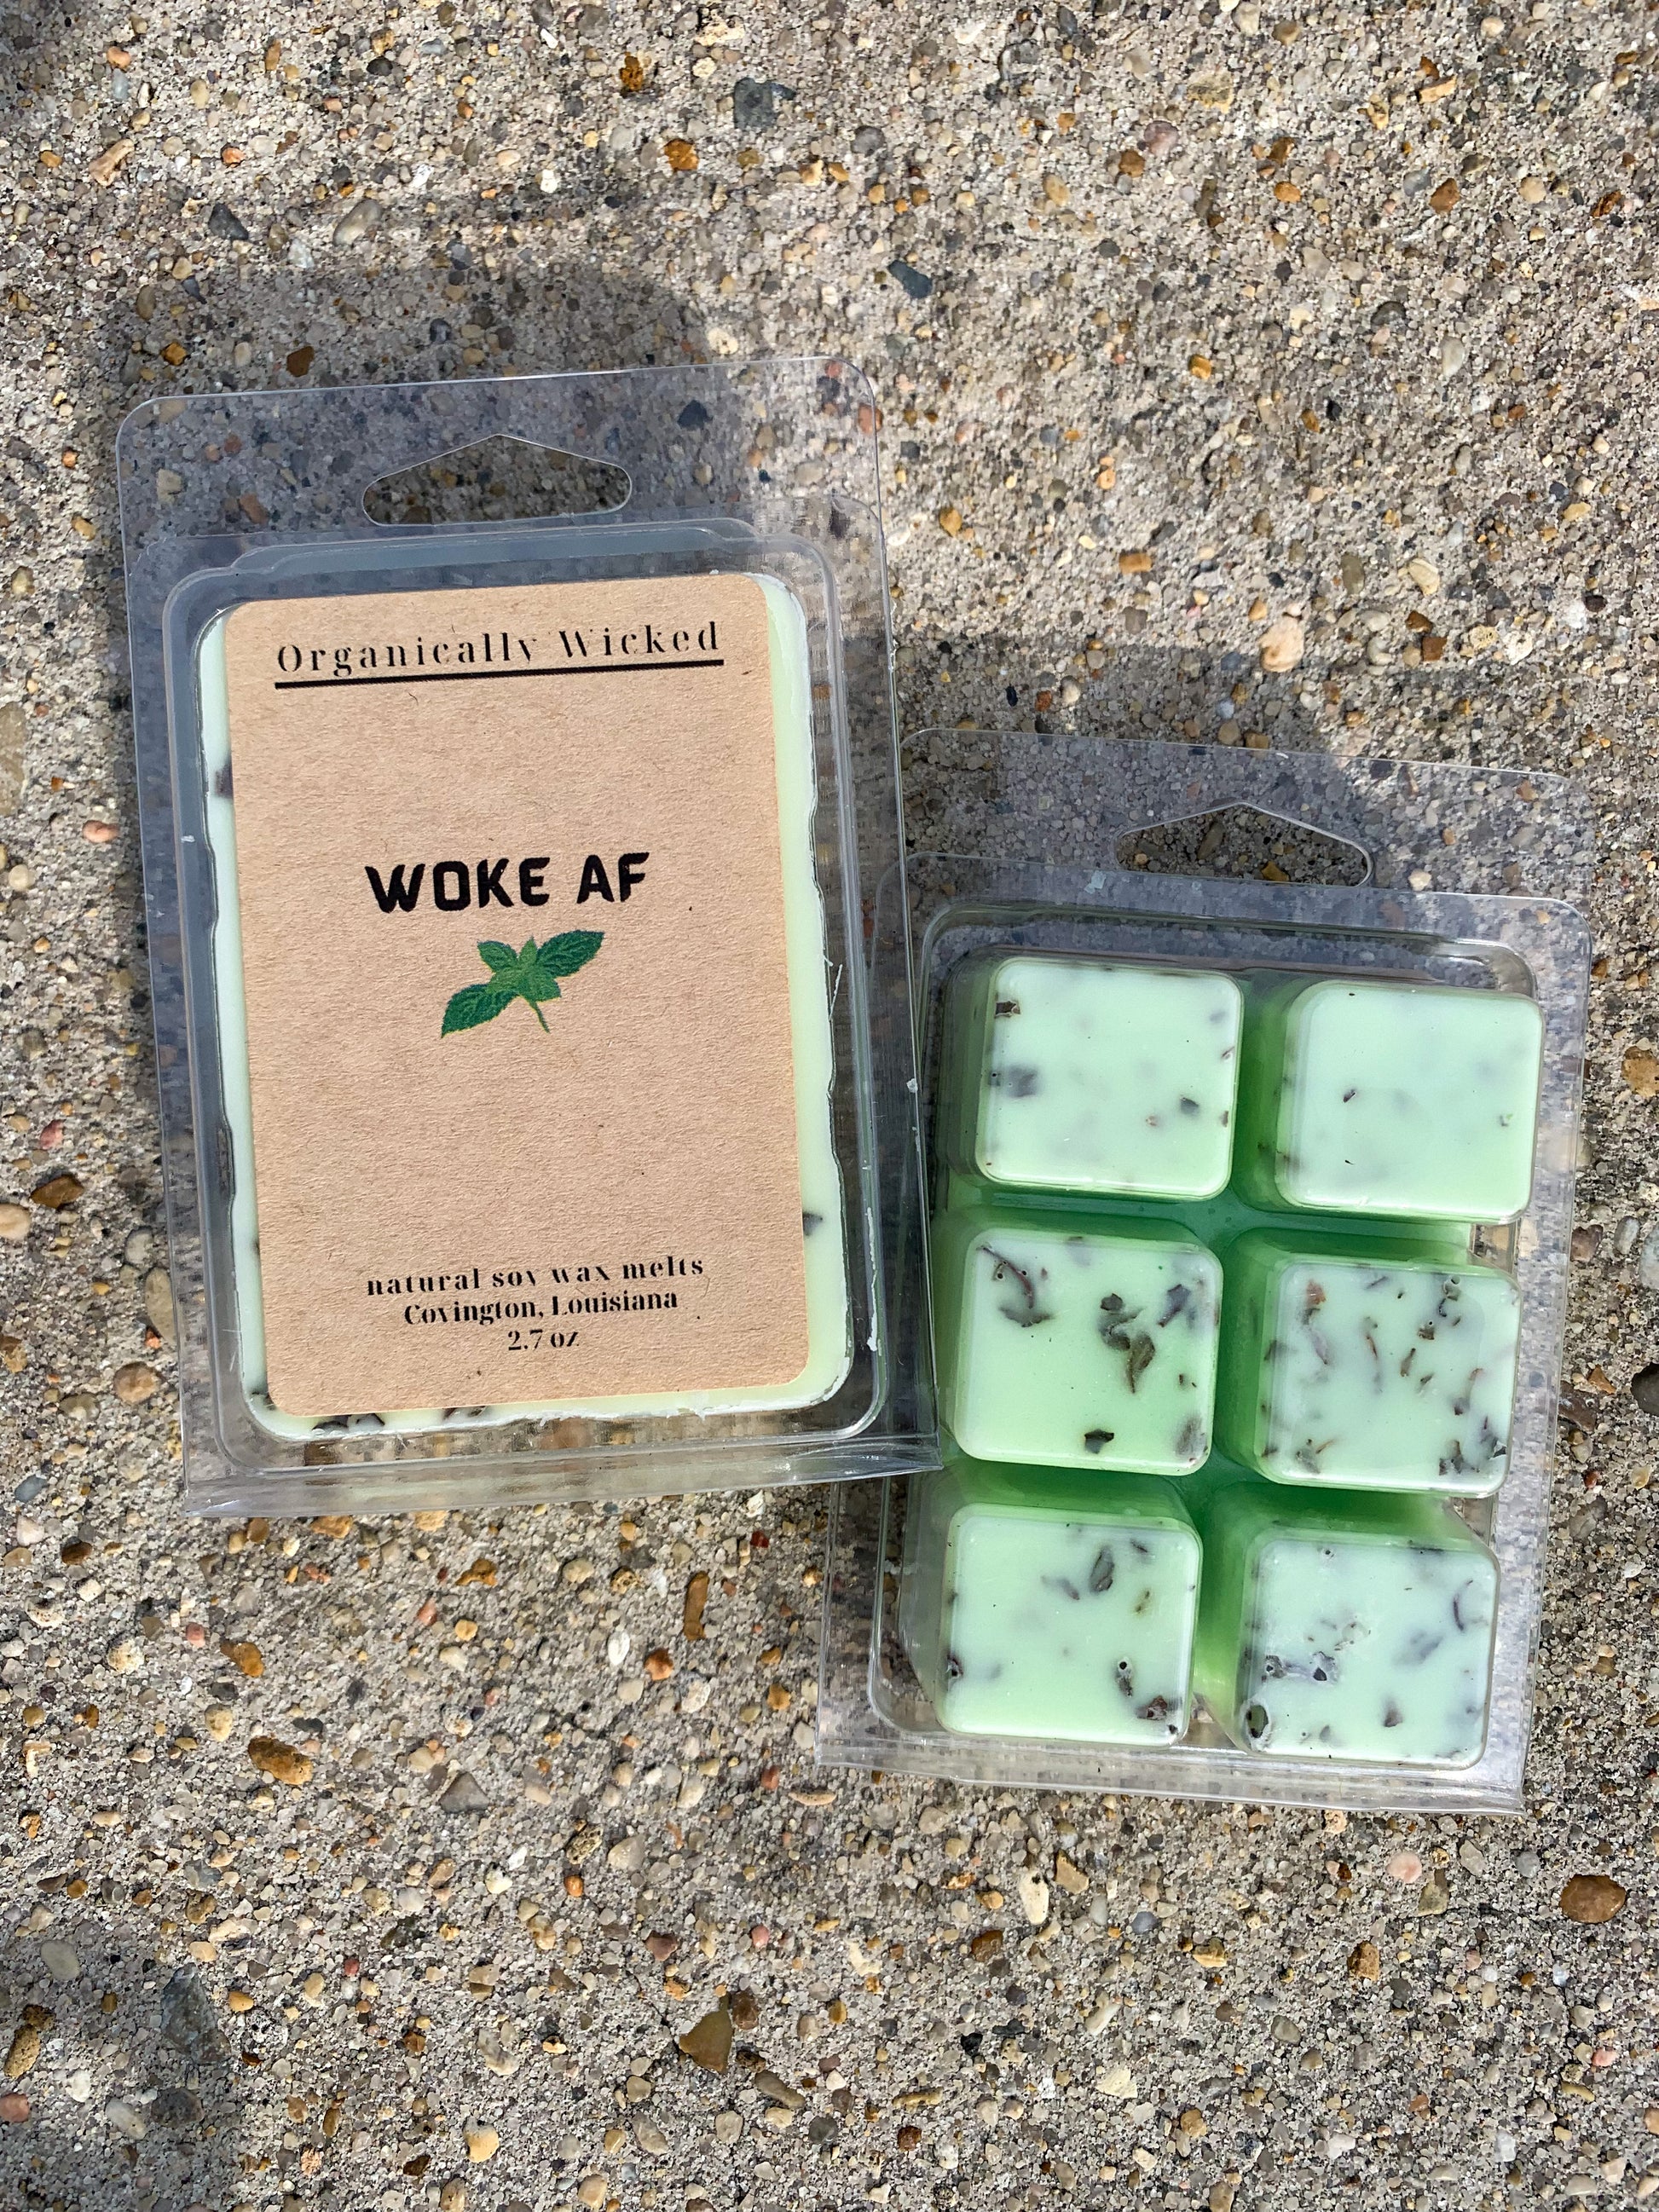 Palo Santo Wax Melts Soy Blend Wax Melts Strongly Scented Scented Wax Tart  